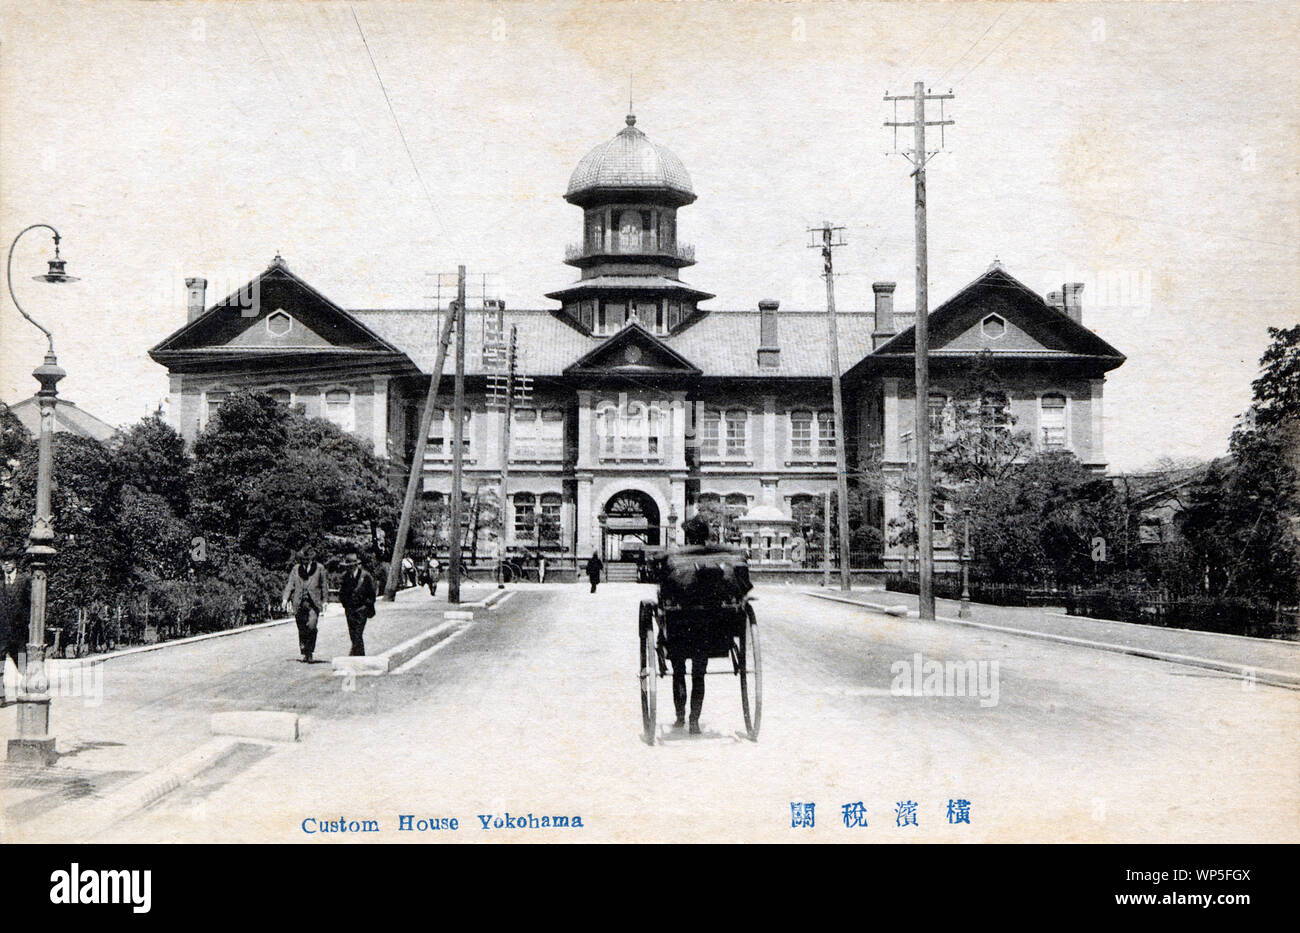 [ 1910s Japan - Yokohama Customs House ] —   The Yokohama Customs House in Yokohama, Kanagawa Prefecture.  The building was designed by American architect Richard P. Bridgens who in 1864 (Genji 1) had come to Japan from San Francisco. It was used from 1873 until the early 1910s.  20th century vintage postcard. Stock Photo